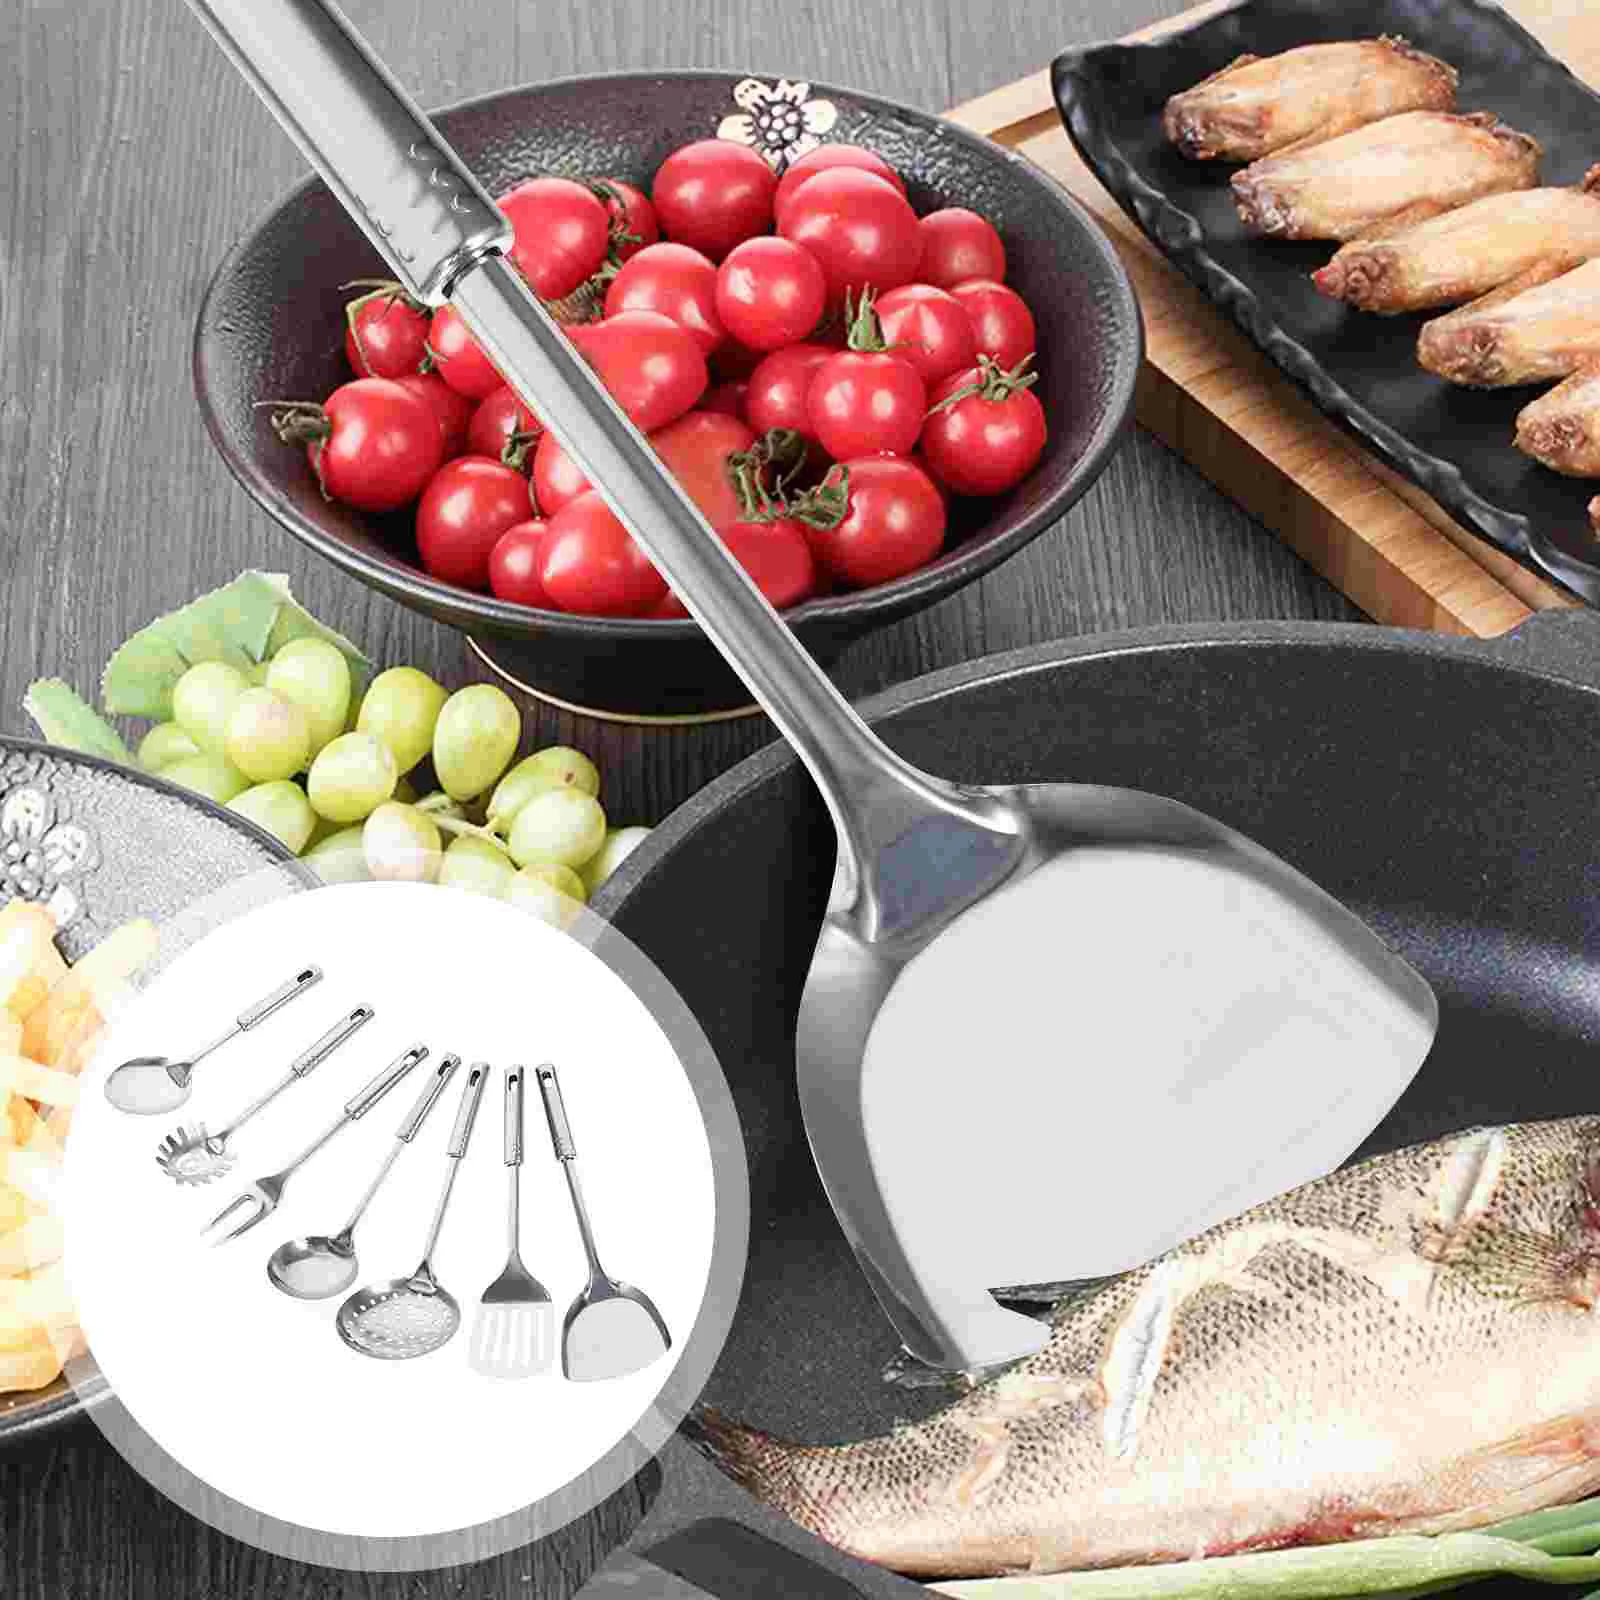 

Cooking Kitchen Stainless Steel Set Utensils Utensil Spatula Spoon Kitchenware Tools Gadgets Cookware Colander Sets Soup Turner